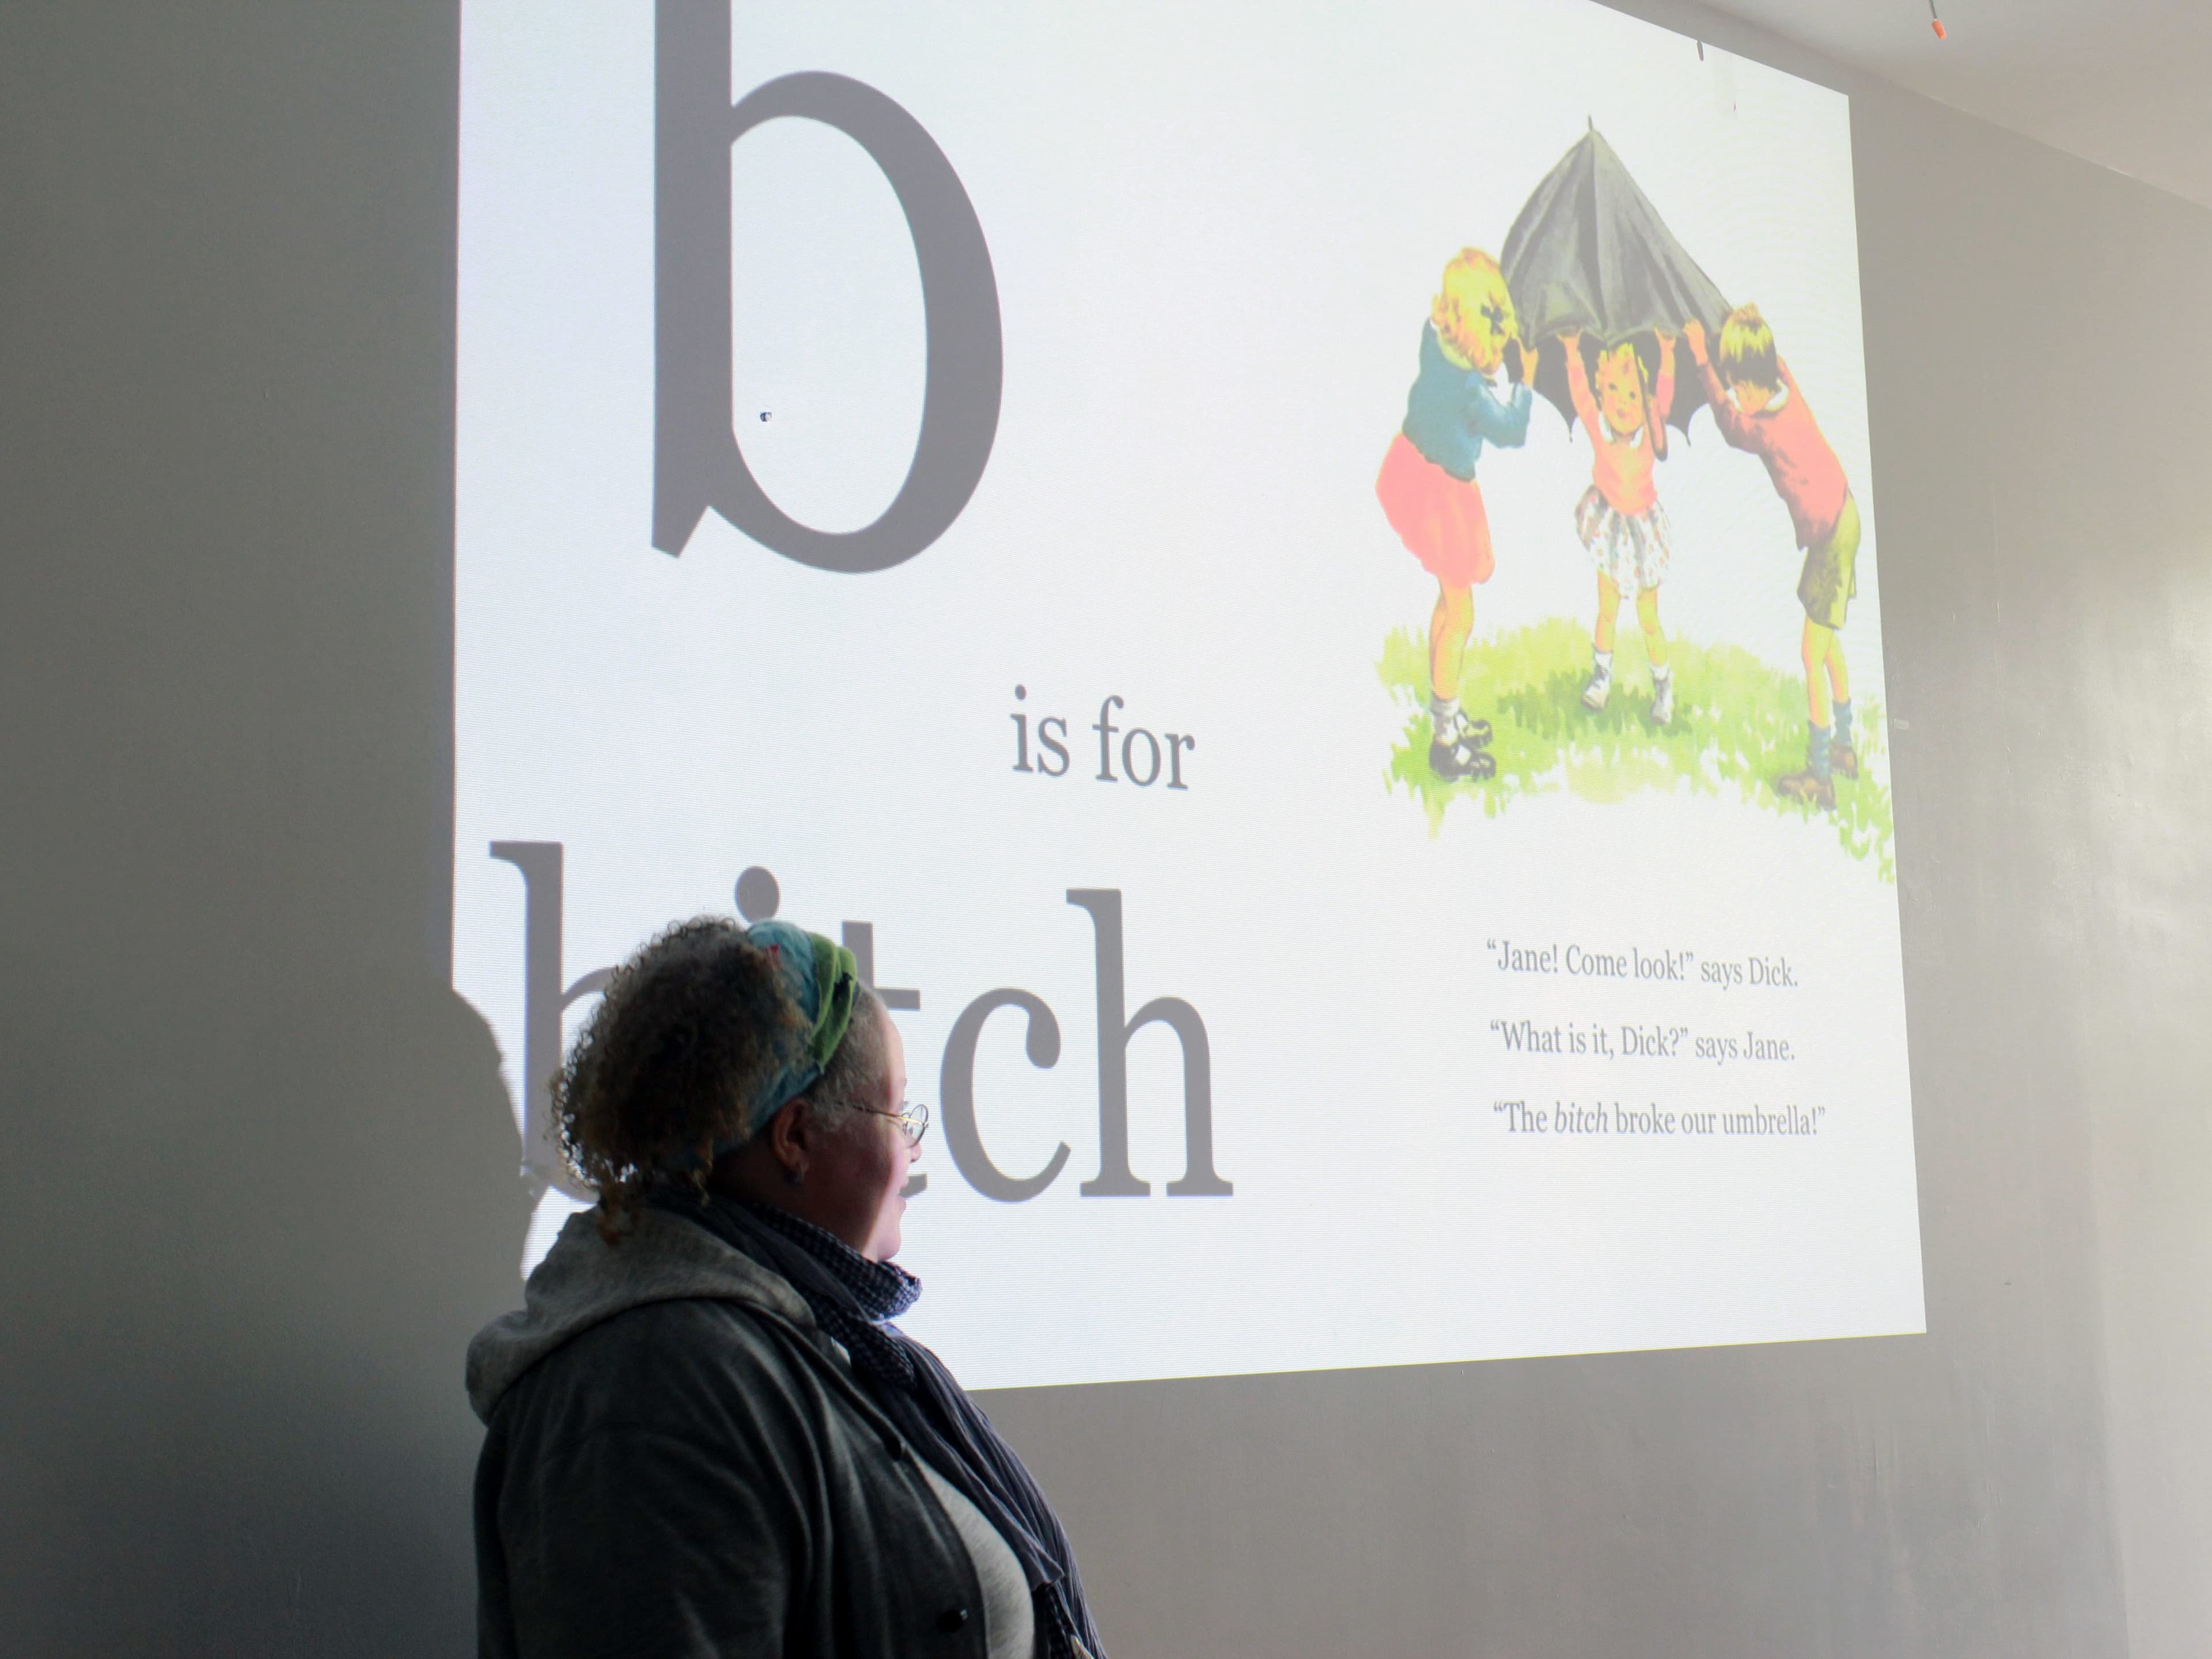 A person stands in front of a projection on a wall displaying a page from a book. The page shows an illustration of children playing underneath a blanket with the text "b is for bitch" and a conversation between characters about their umbrella.